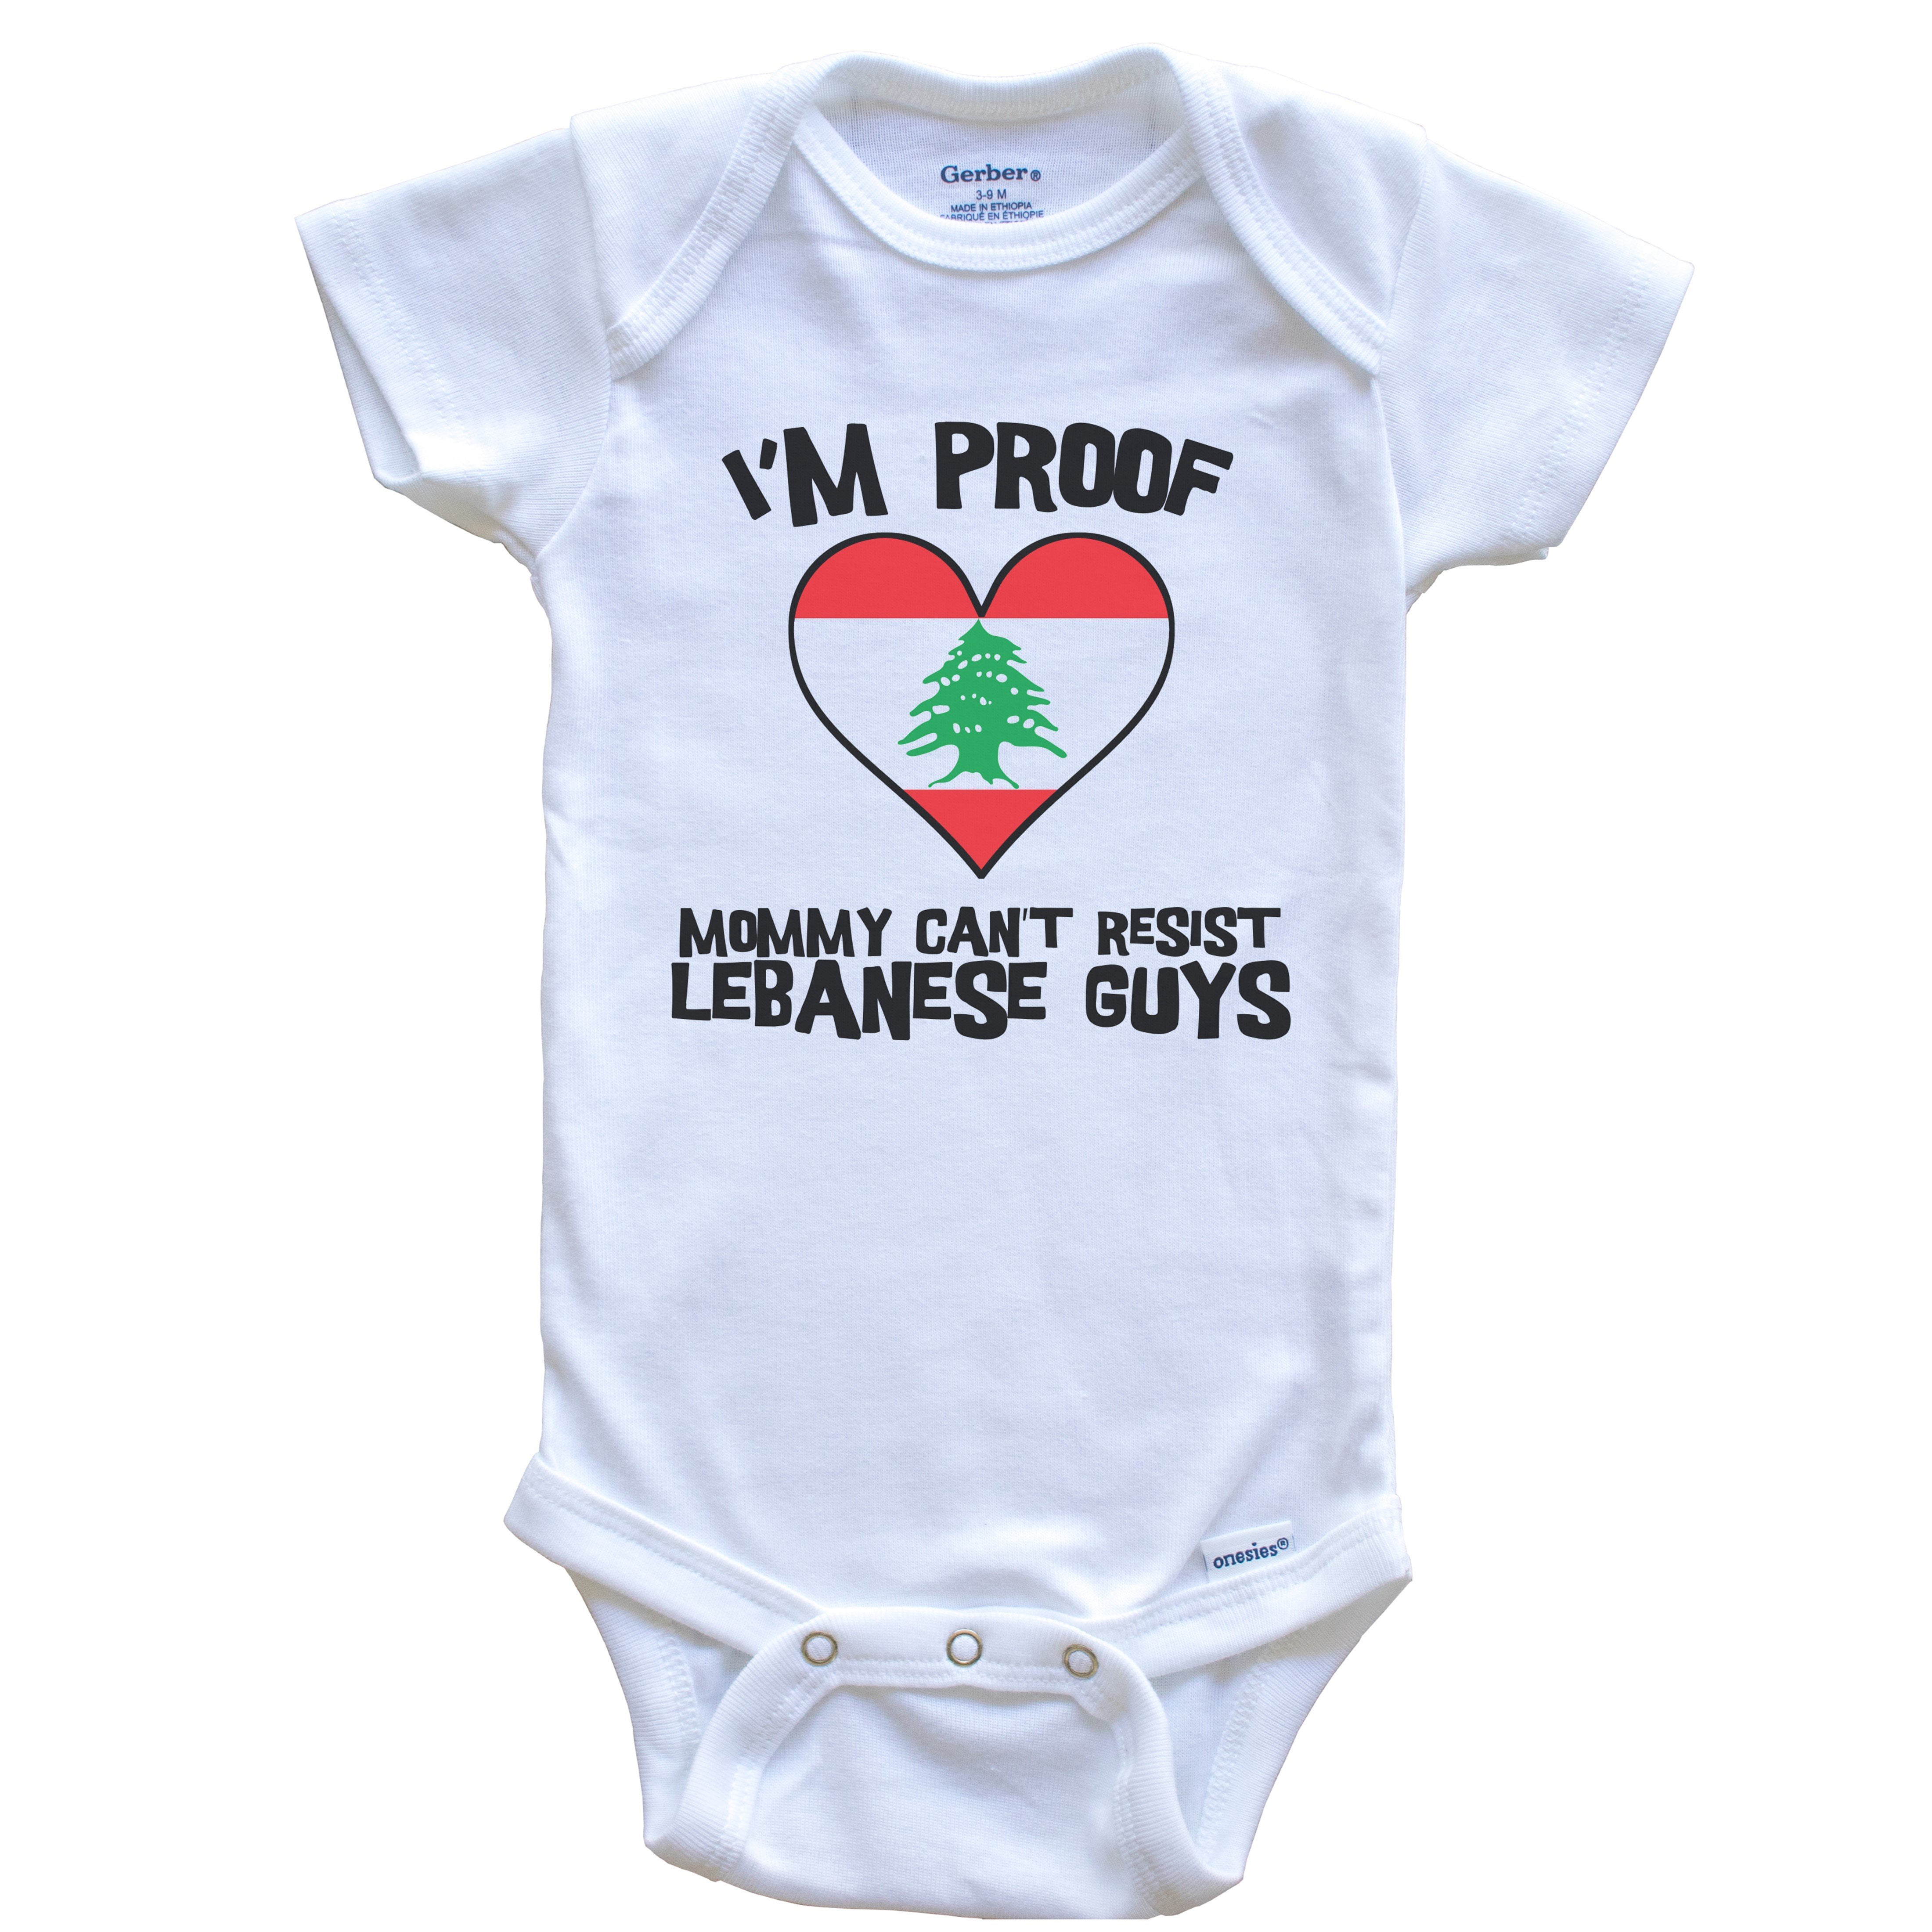 IM PROOF MOMMY PUTS OUT Gerber® Onesie® FUNNY Baby Shower Gift INFANT T-SHIRT 